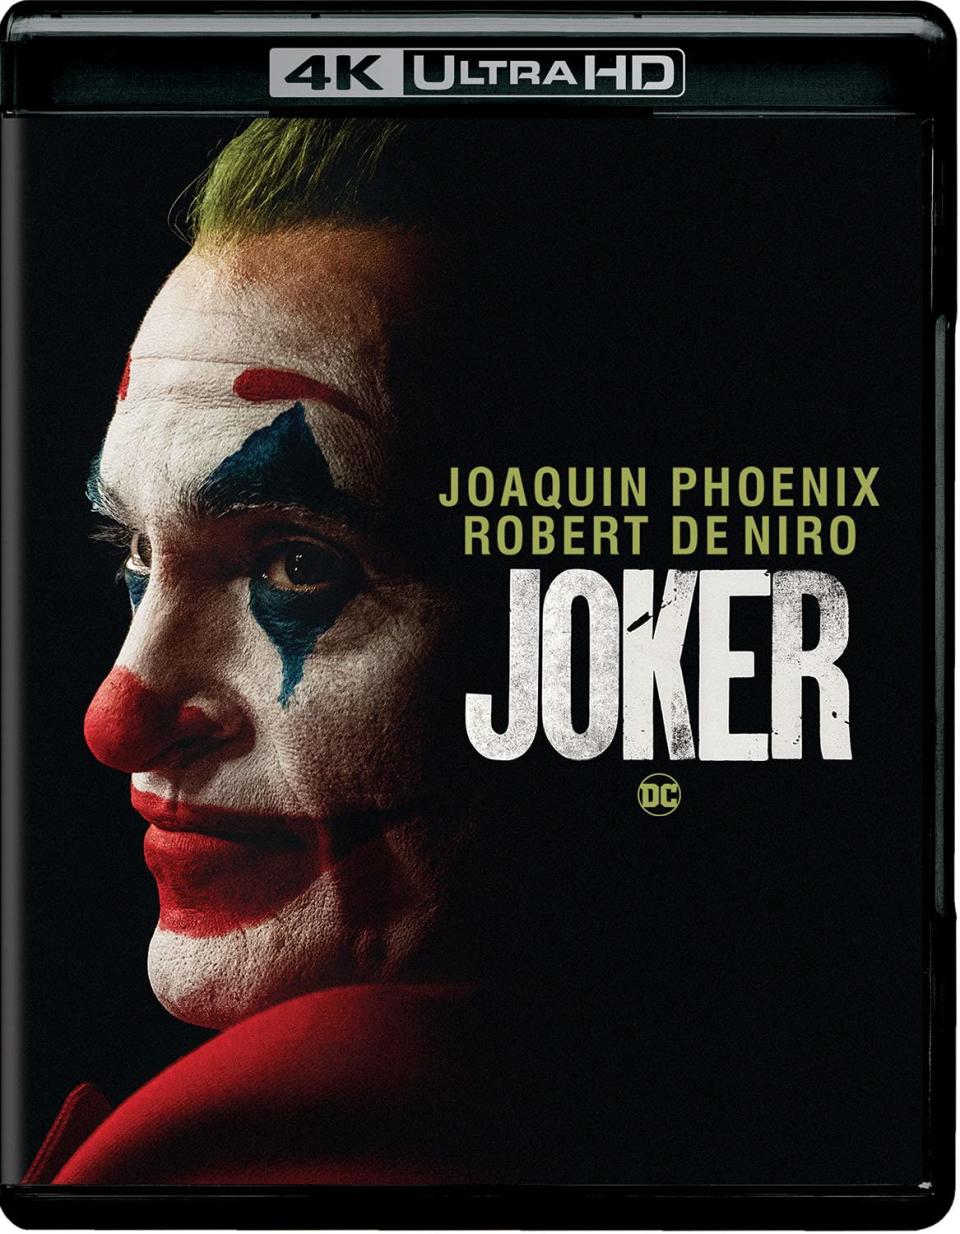 dvd cover with joaquin phoenix on front